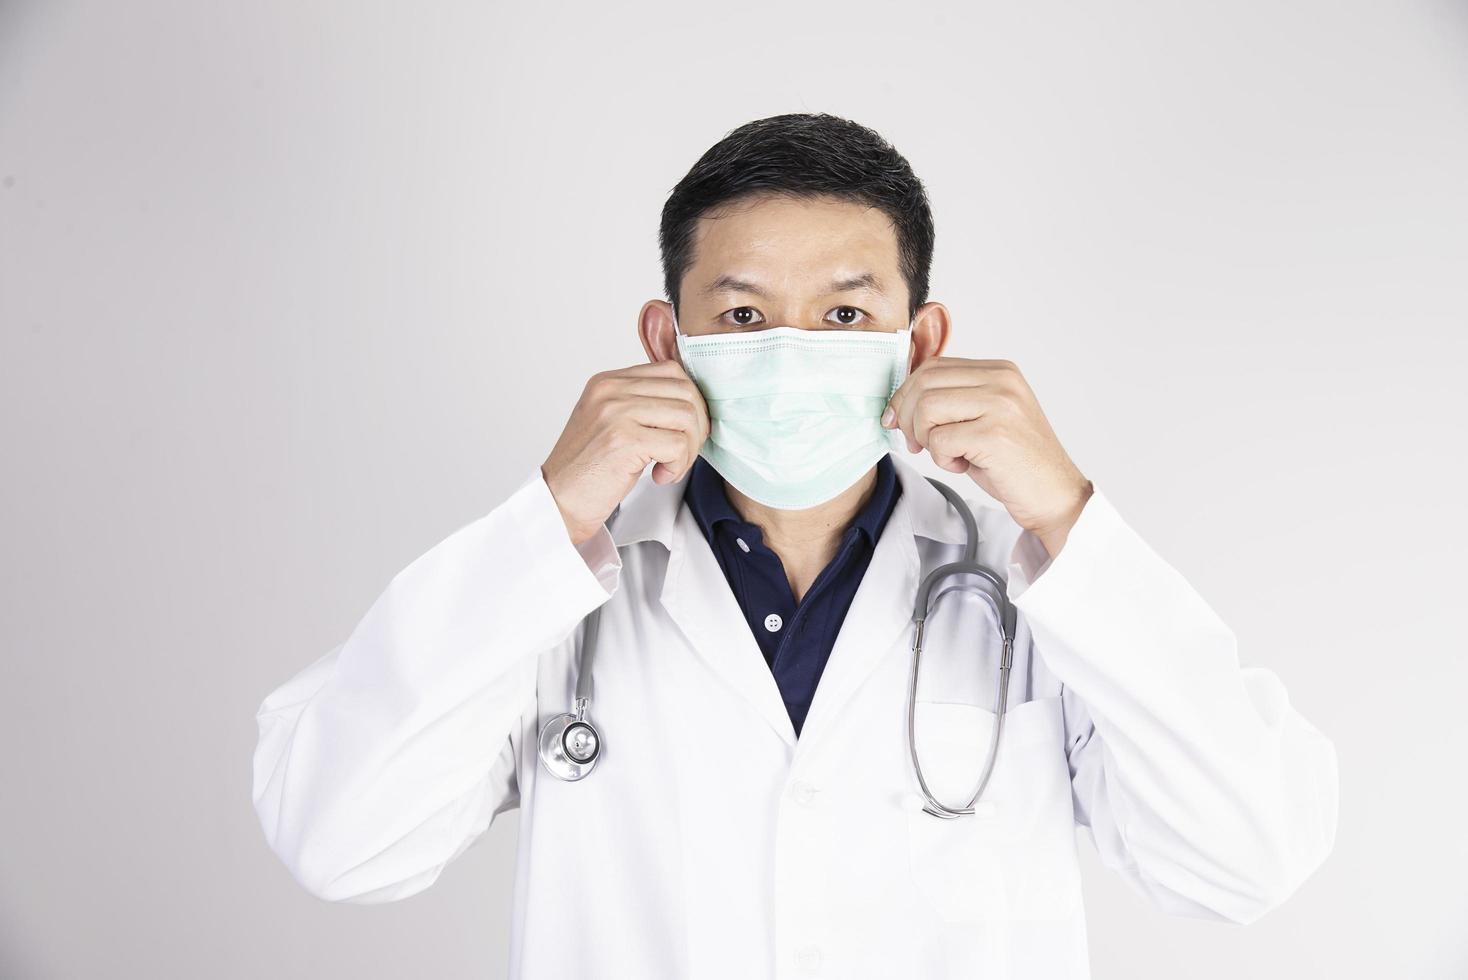 Asian doctor is wearing double layer masks for protecting Covid-19 virus - medical people working concept photo